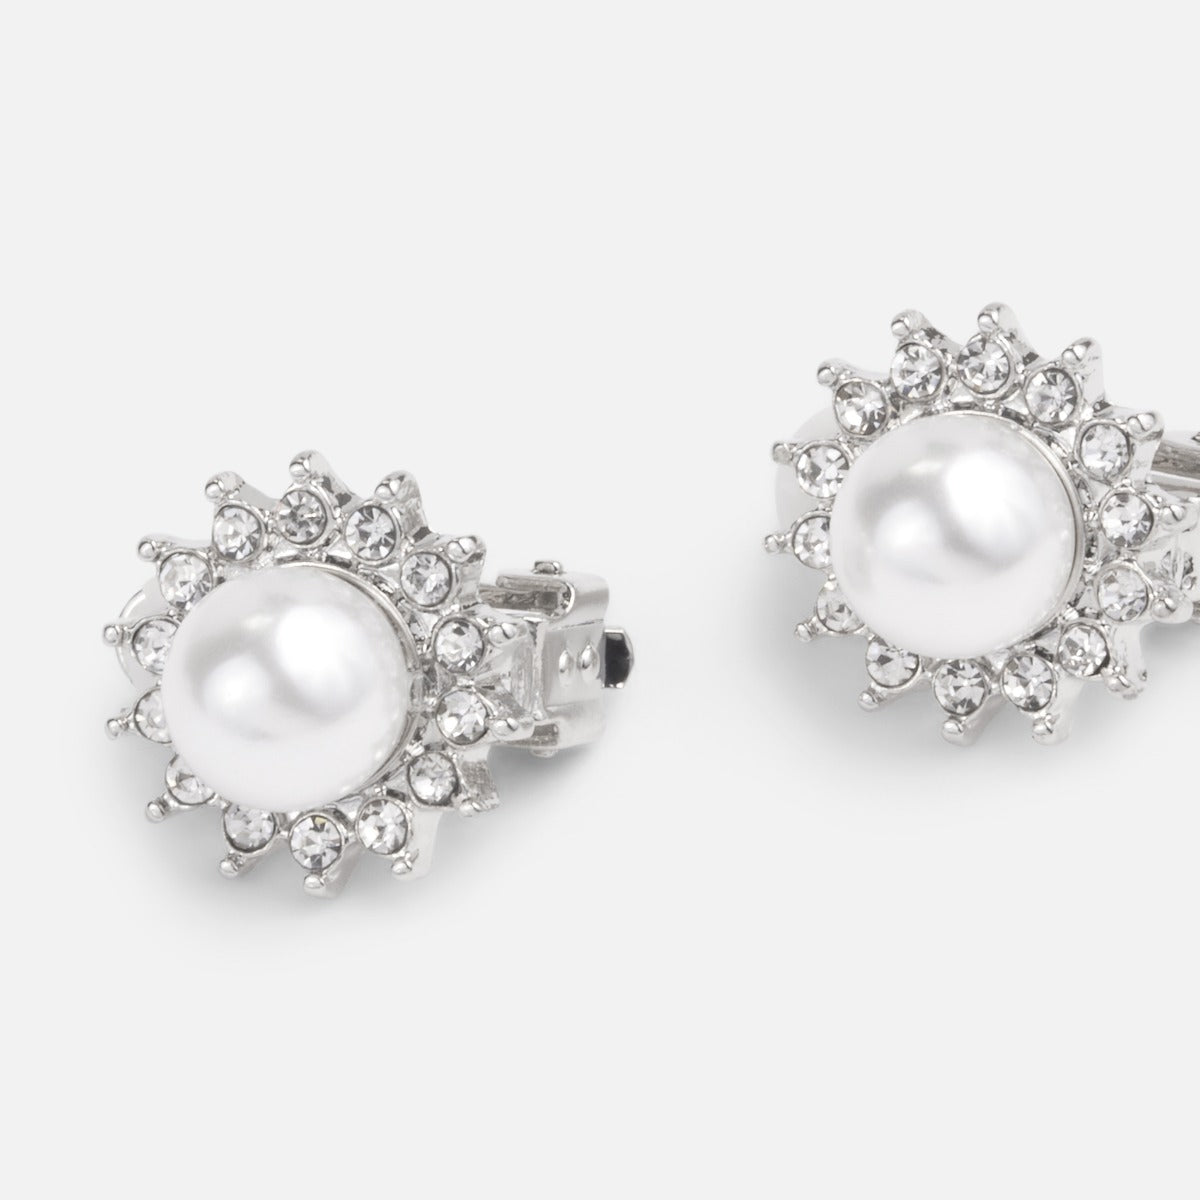 Star shape clip earrings with pearl and stones